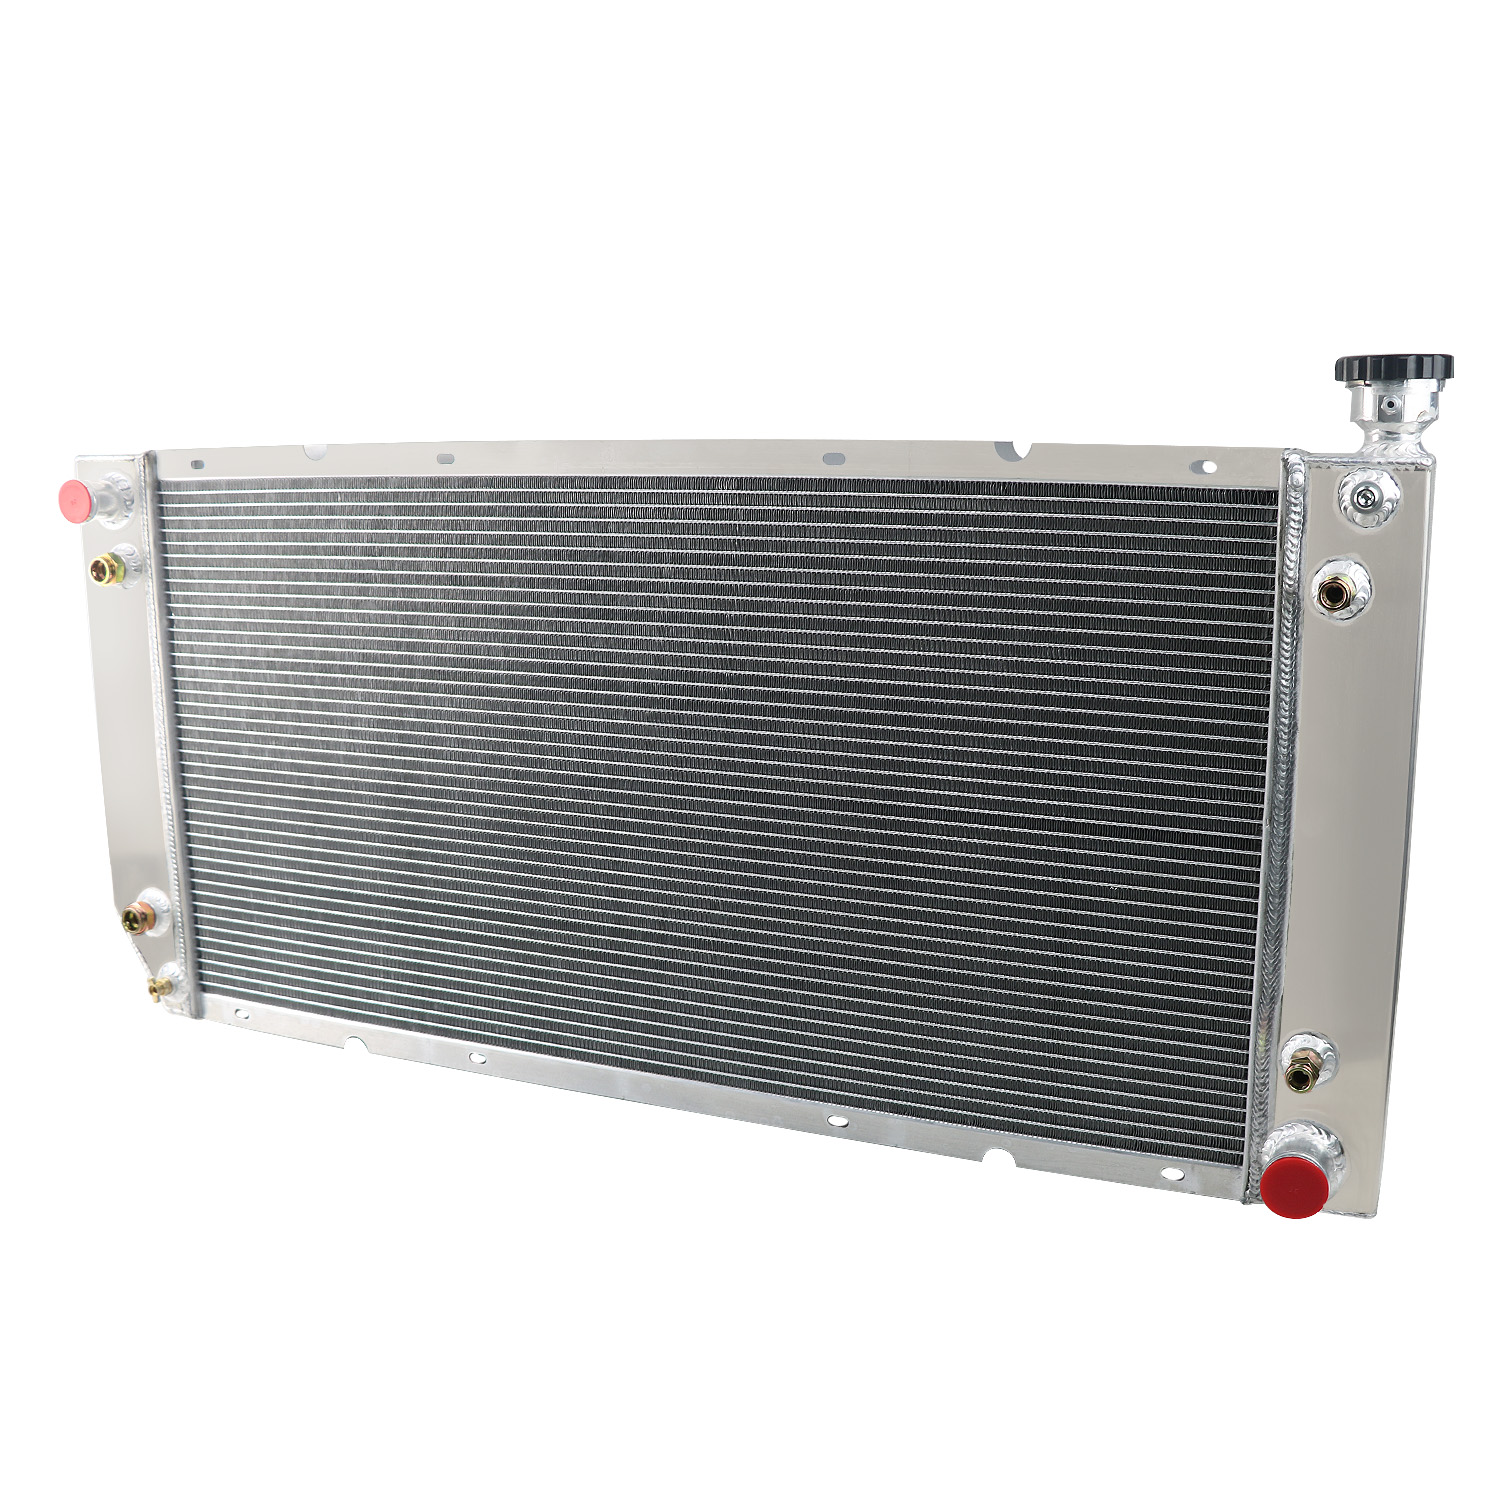 Details about   4 ROW Radiator For 60-62 Chevy Suburban Panel Truck Apache C/K Series GMC AT/MT 